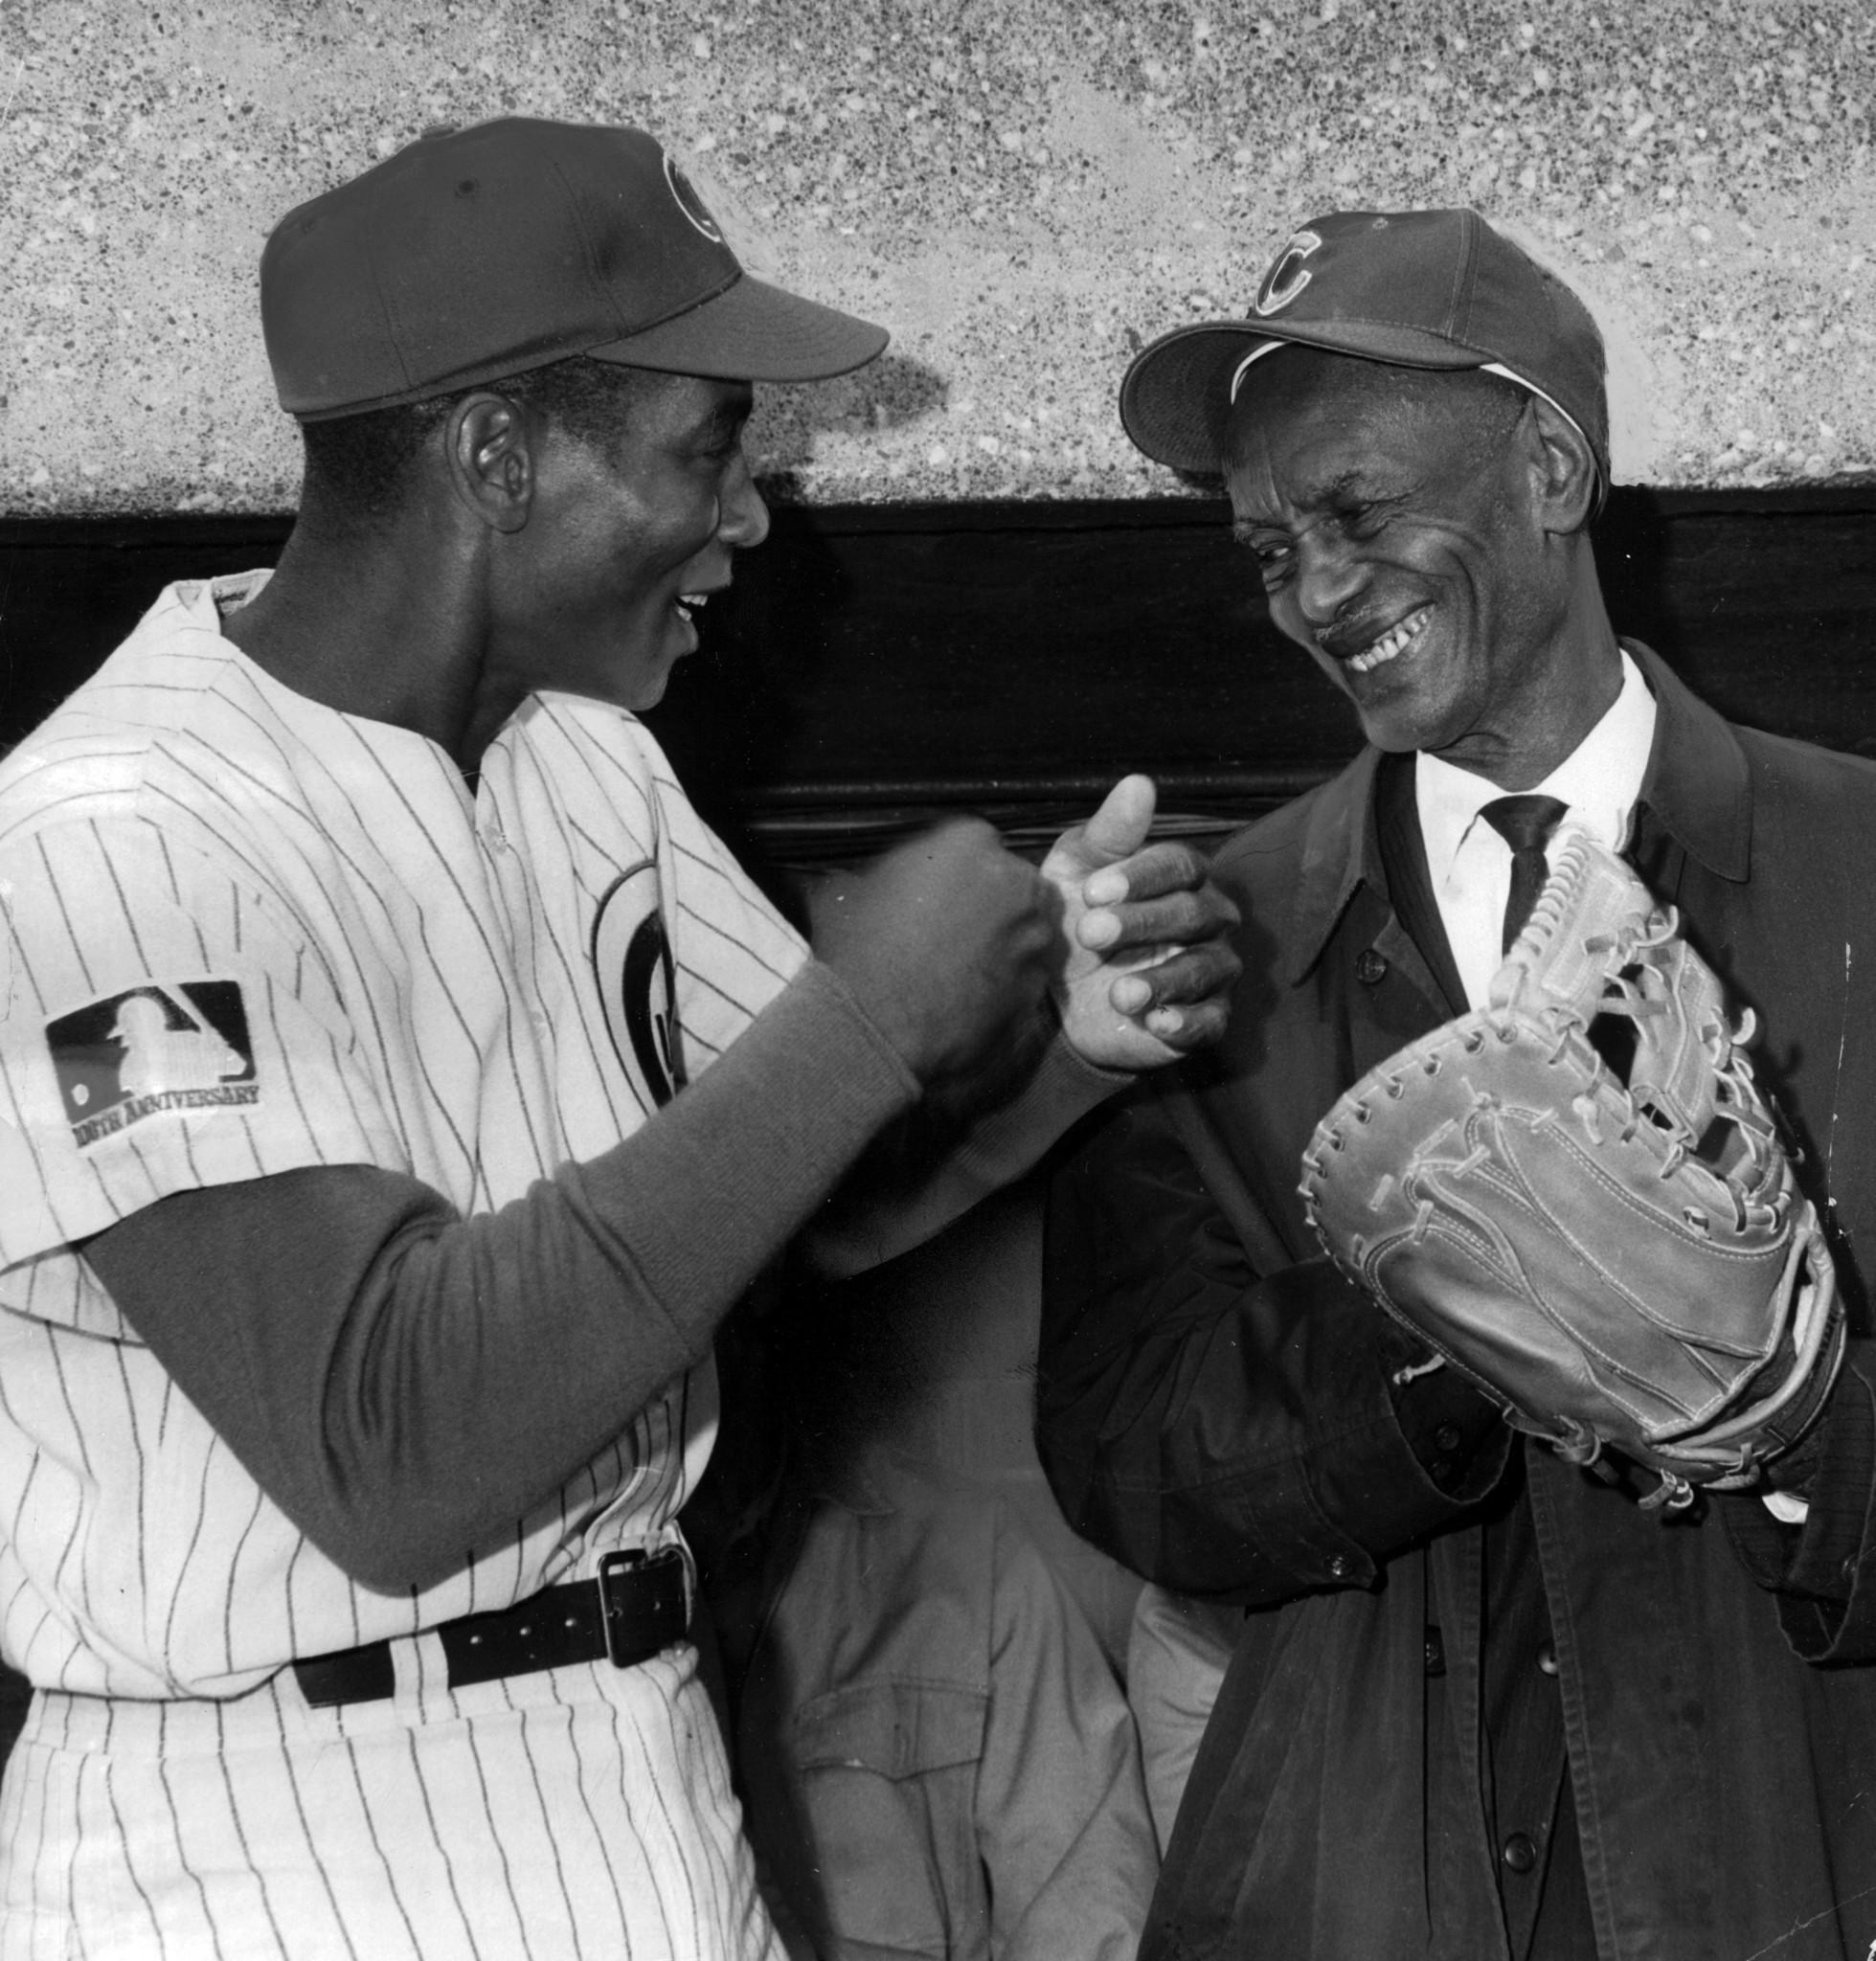 Ernie Banks and Harry Caray statue restoration